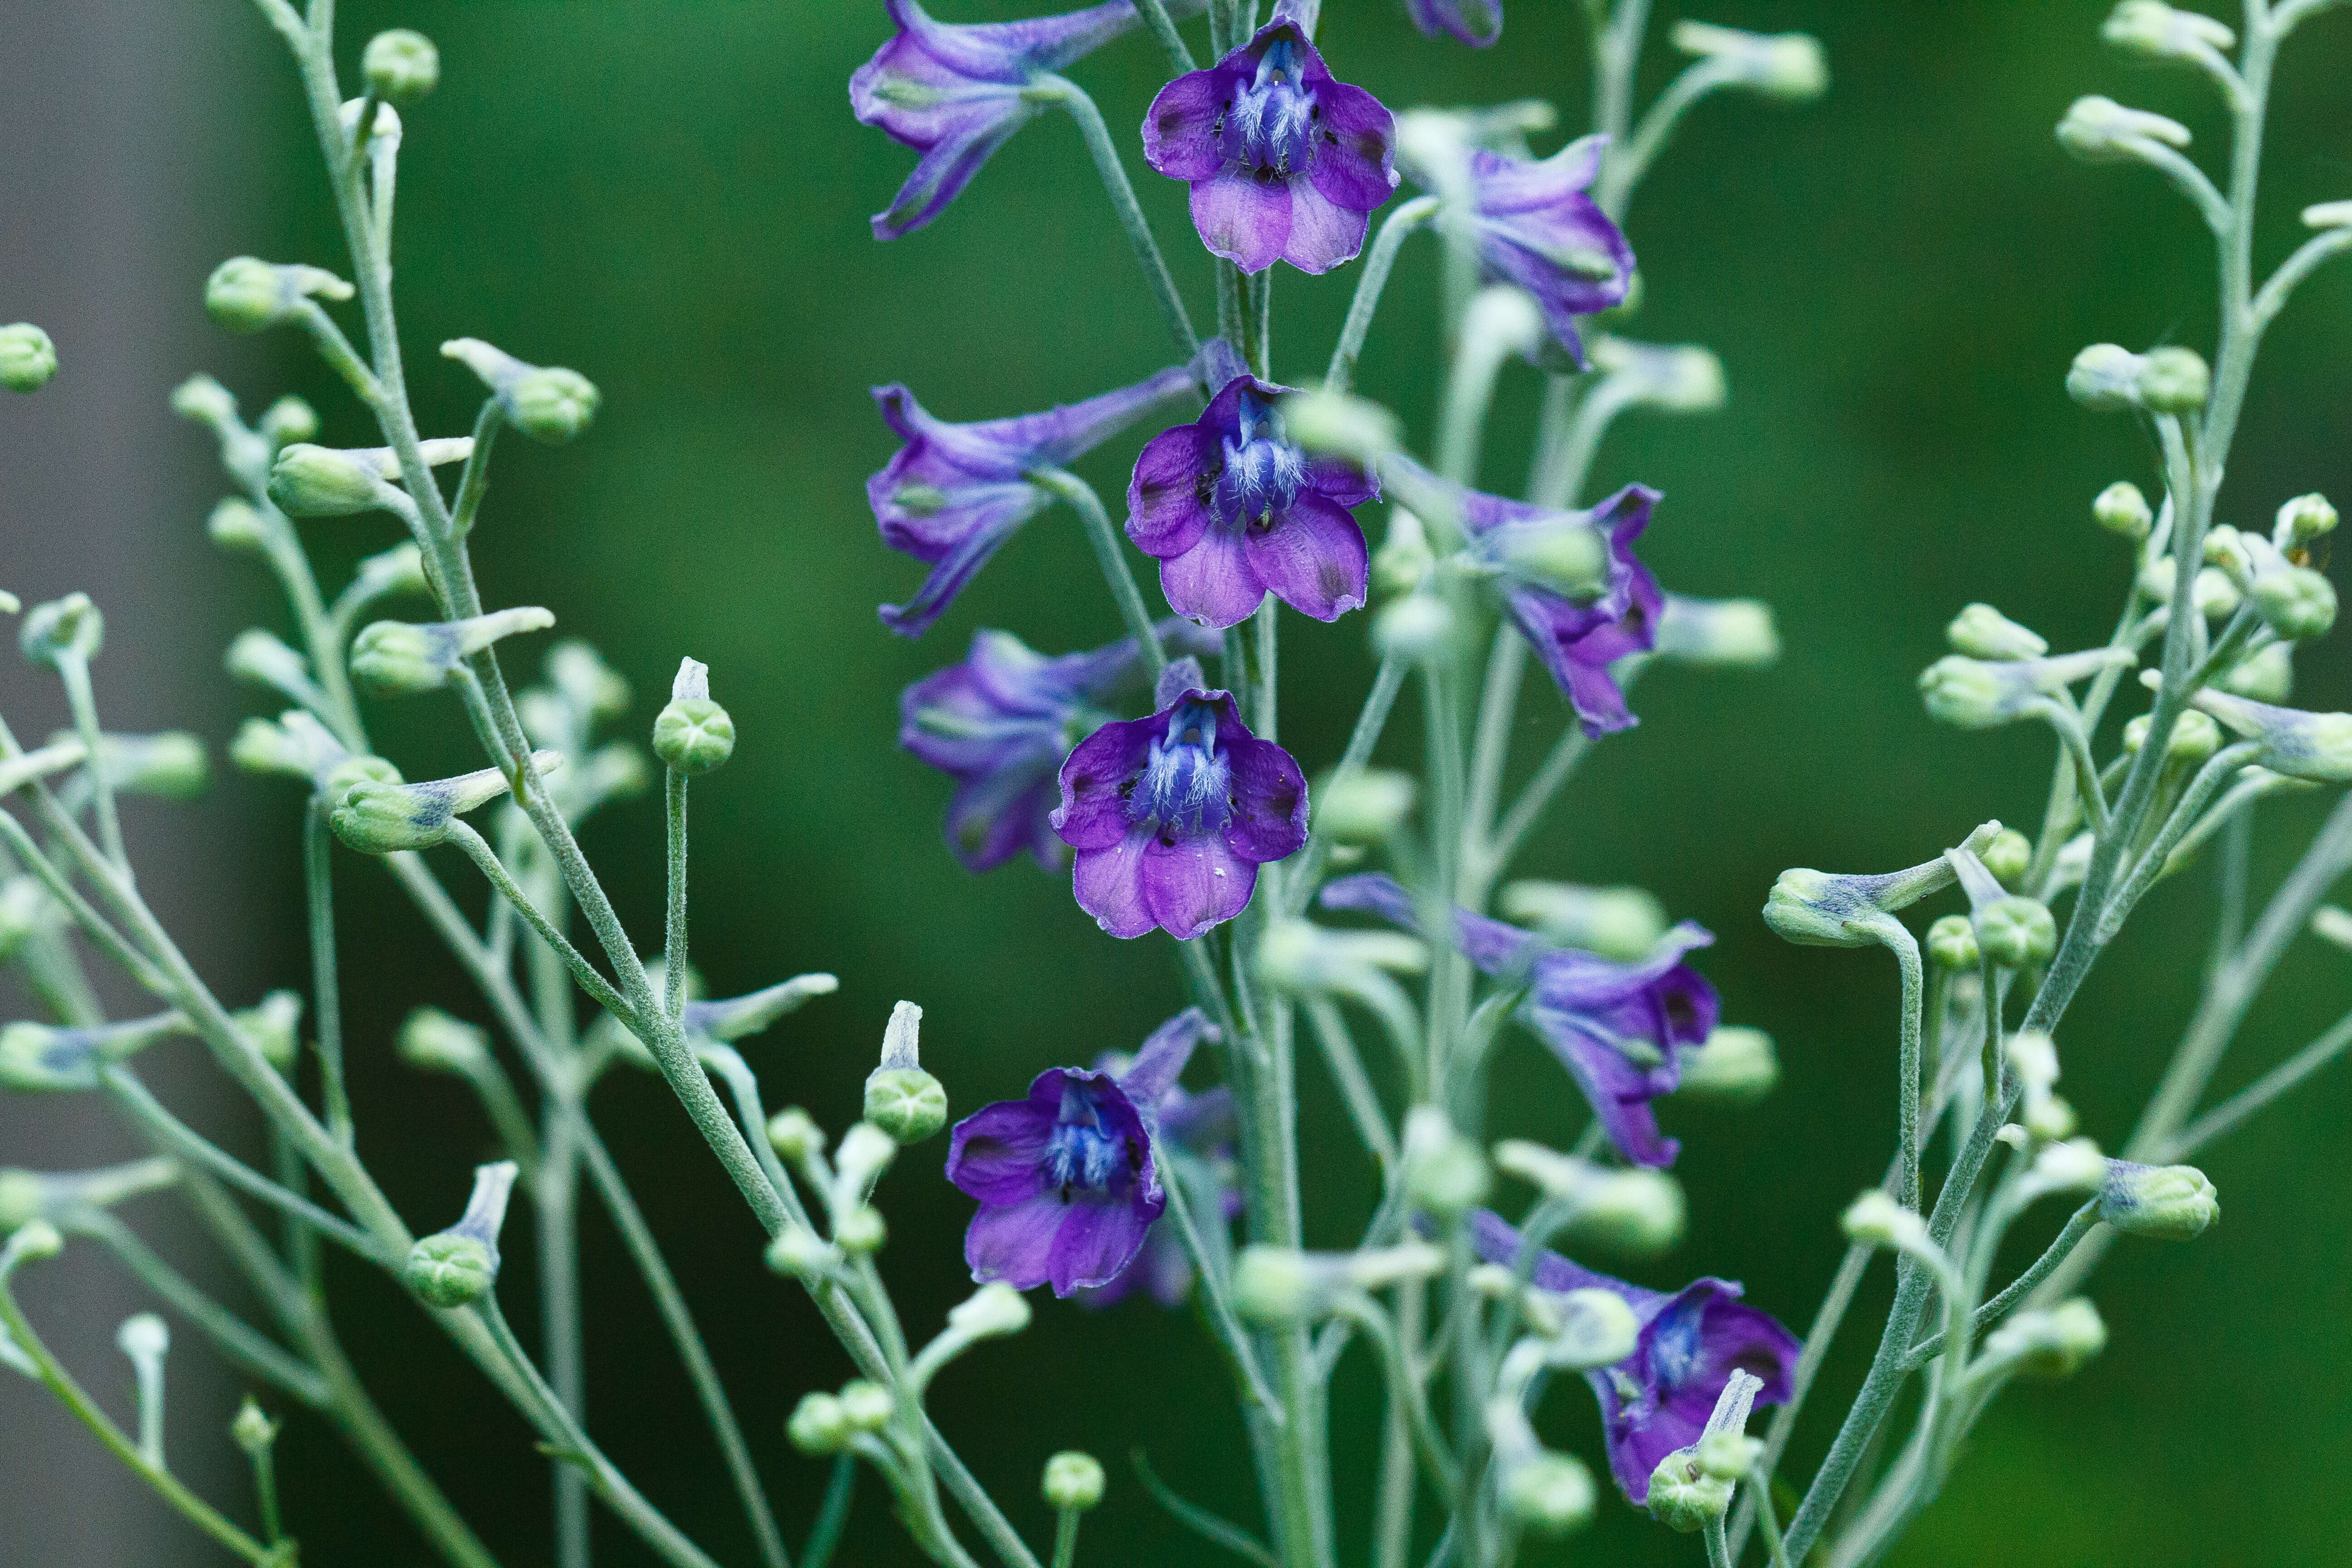 Image of tall larkspur